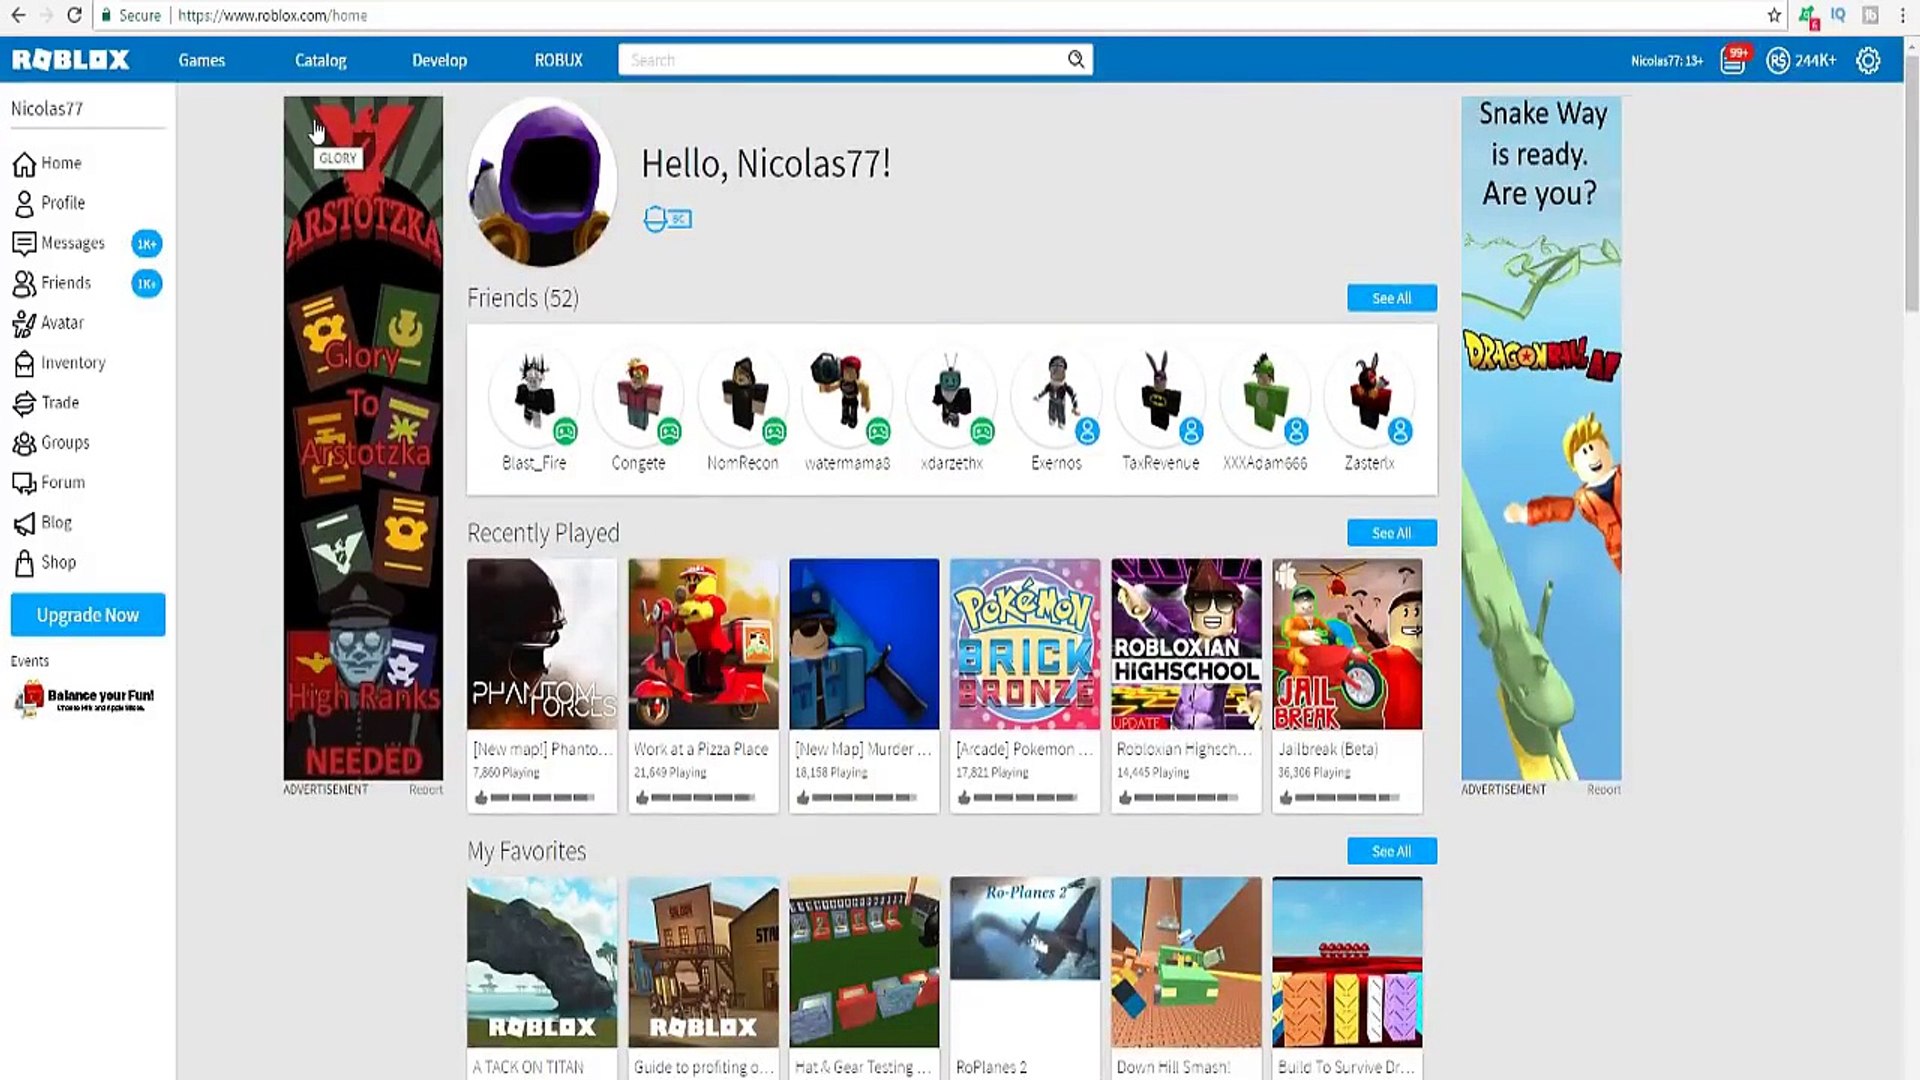 Want 1 Million Robux On Roblox Watch This Video Video Dailymotion - i donated 10 robux roblox